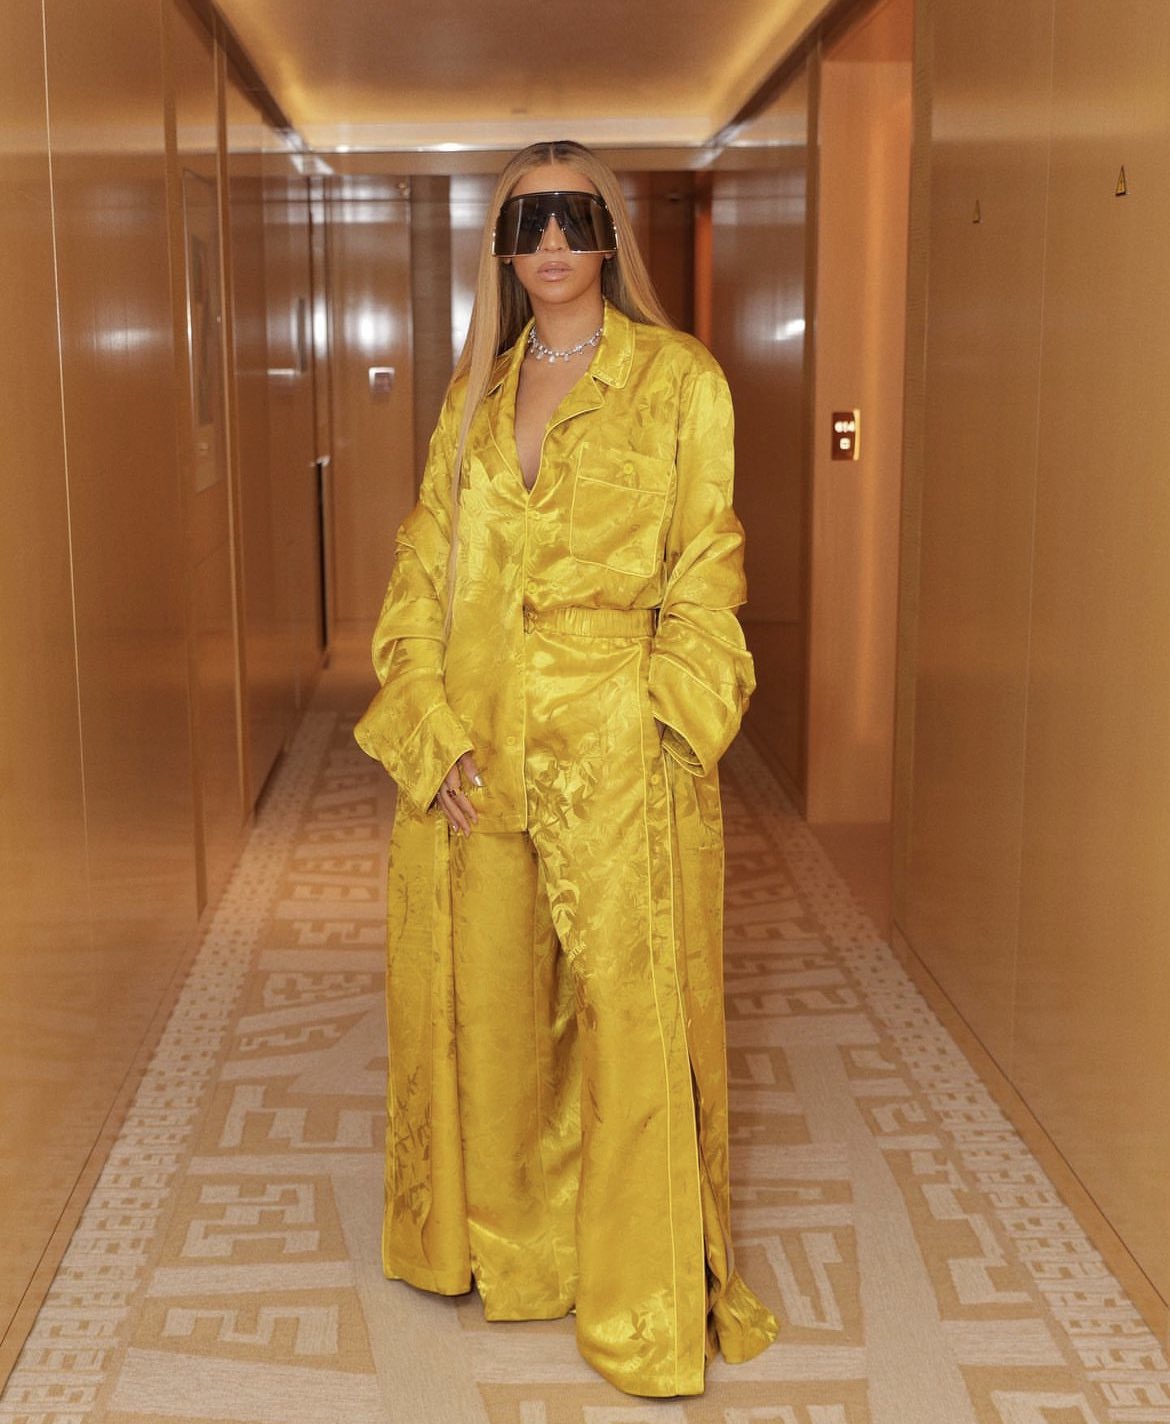 STYLEBEYONCÉ is THIQUE on X: Beyoncé at Paris Fashion Week for Pharrell's  LV show in custom Louis Vuitton and Tiffany & Co jewelry Styled by KJ  Moody  / X